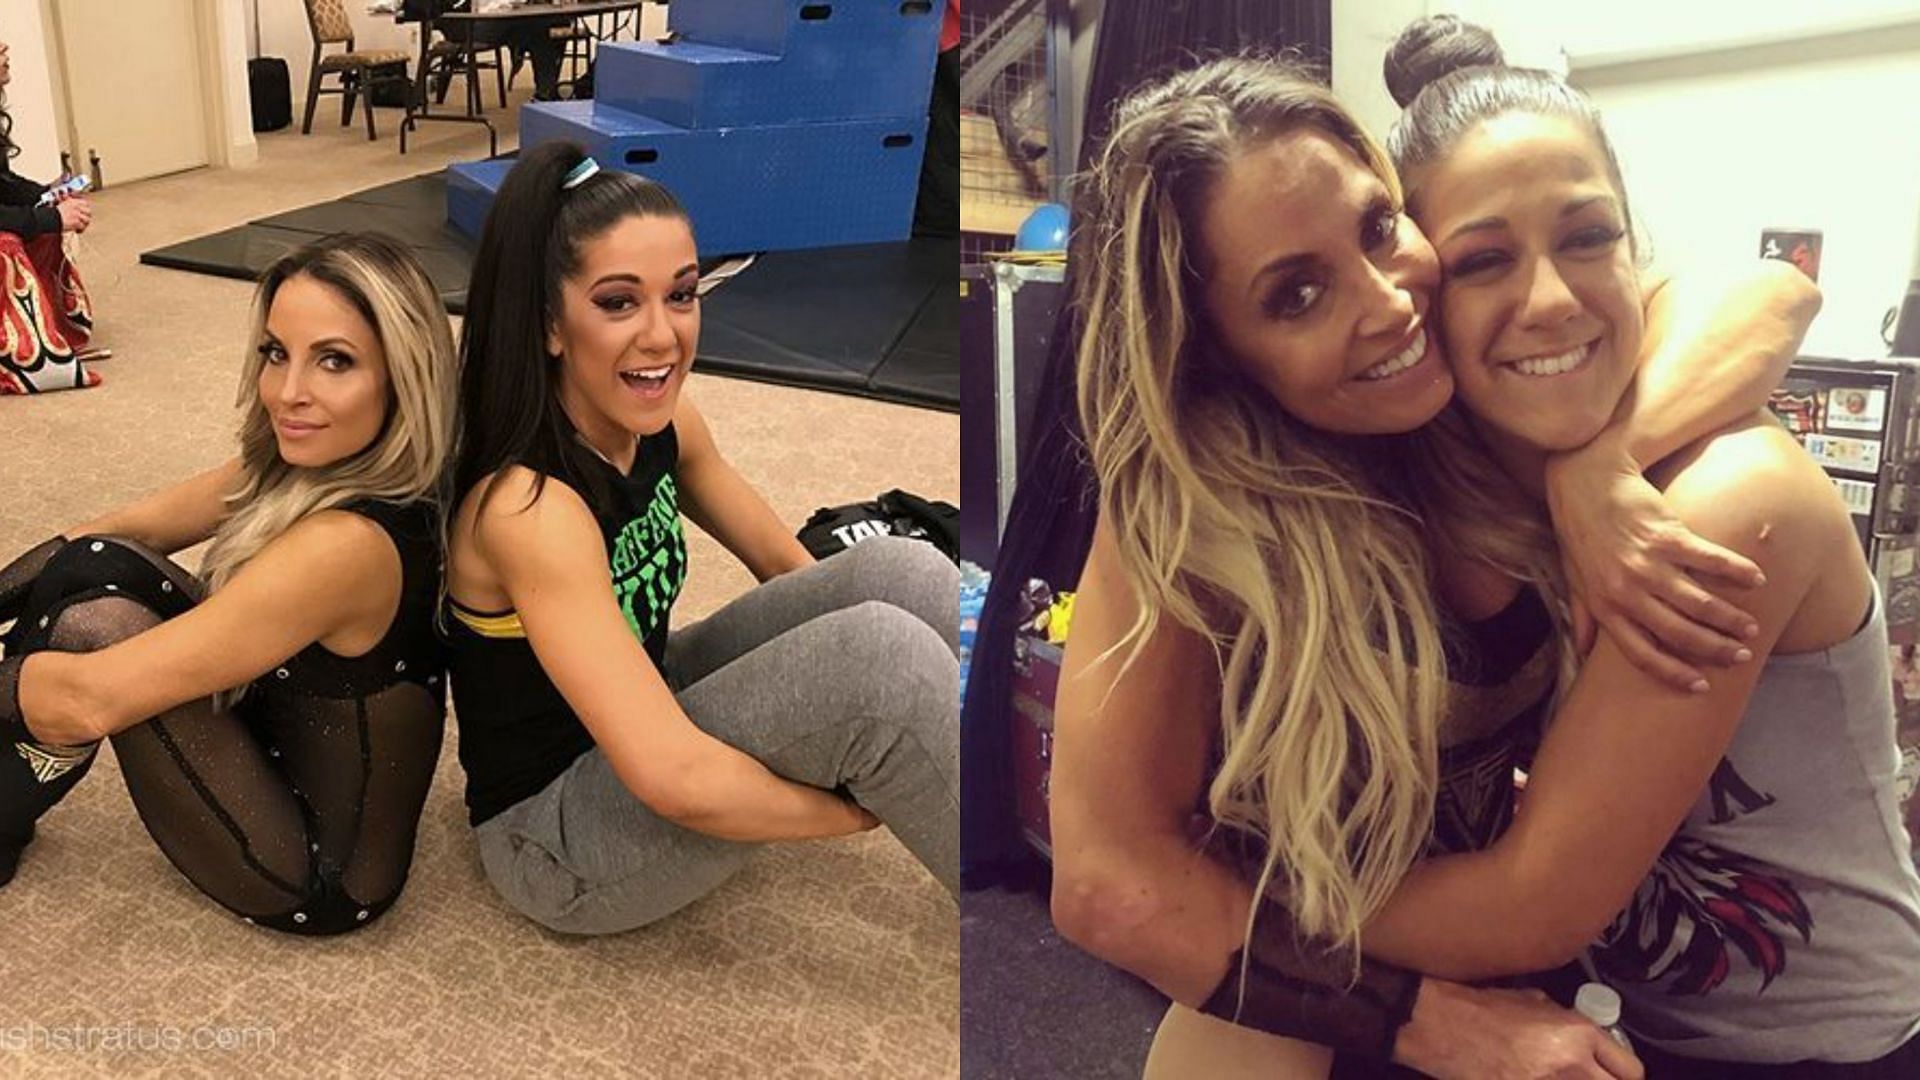 Bayley could confront Trish Stratus on Monday Night RAW